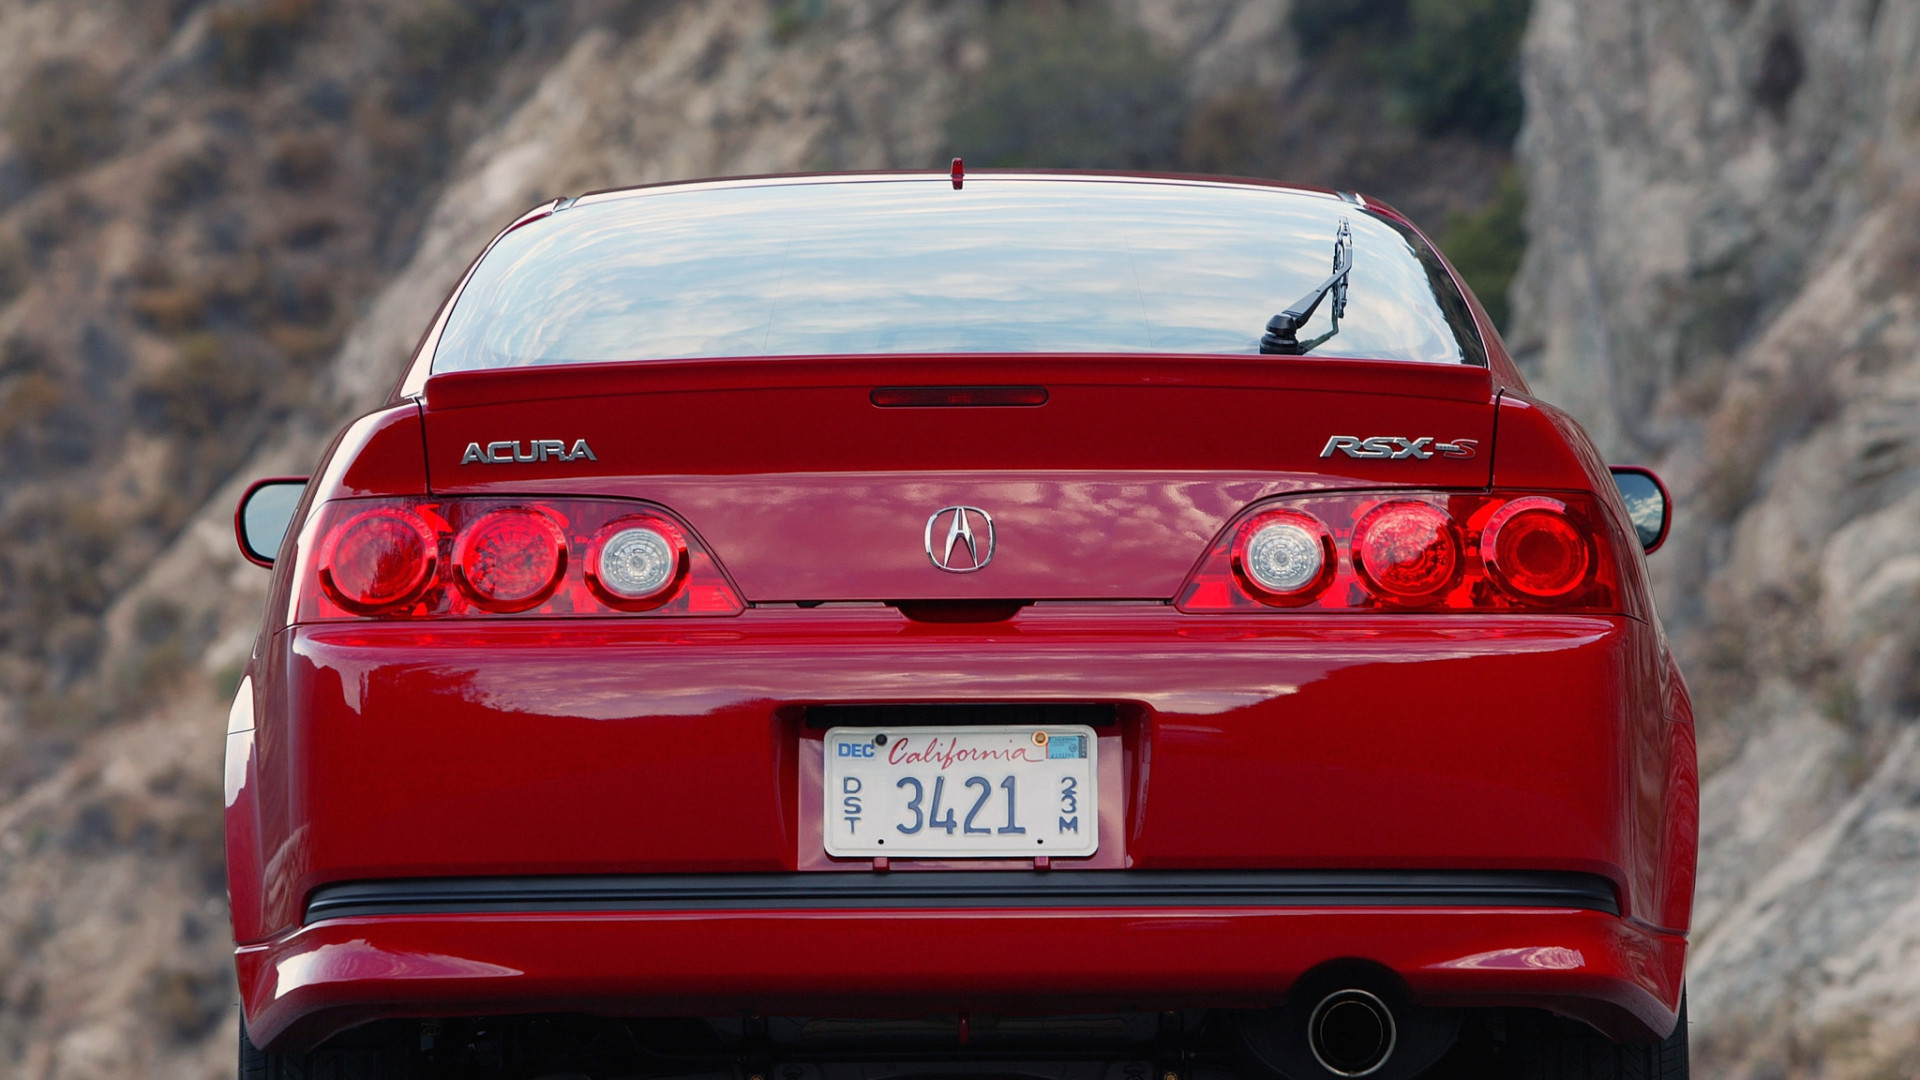 1920x1080  Wallpaper acura, rsx, red, rear view, style, cars, nature